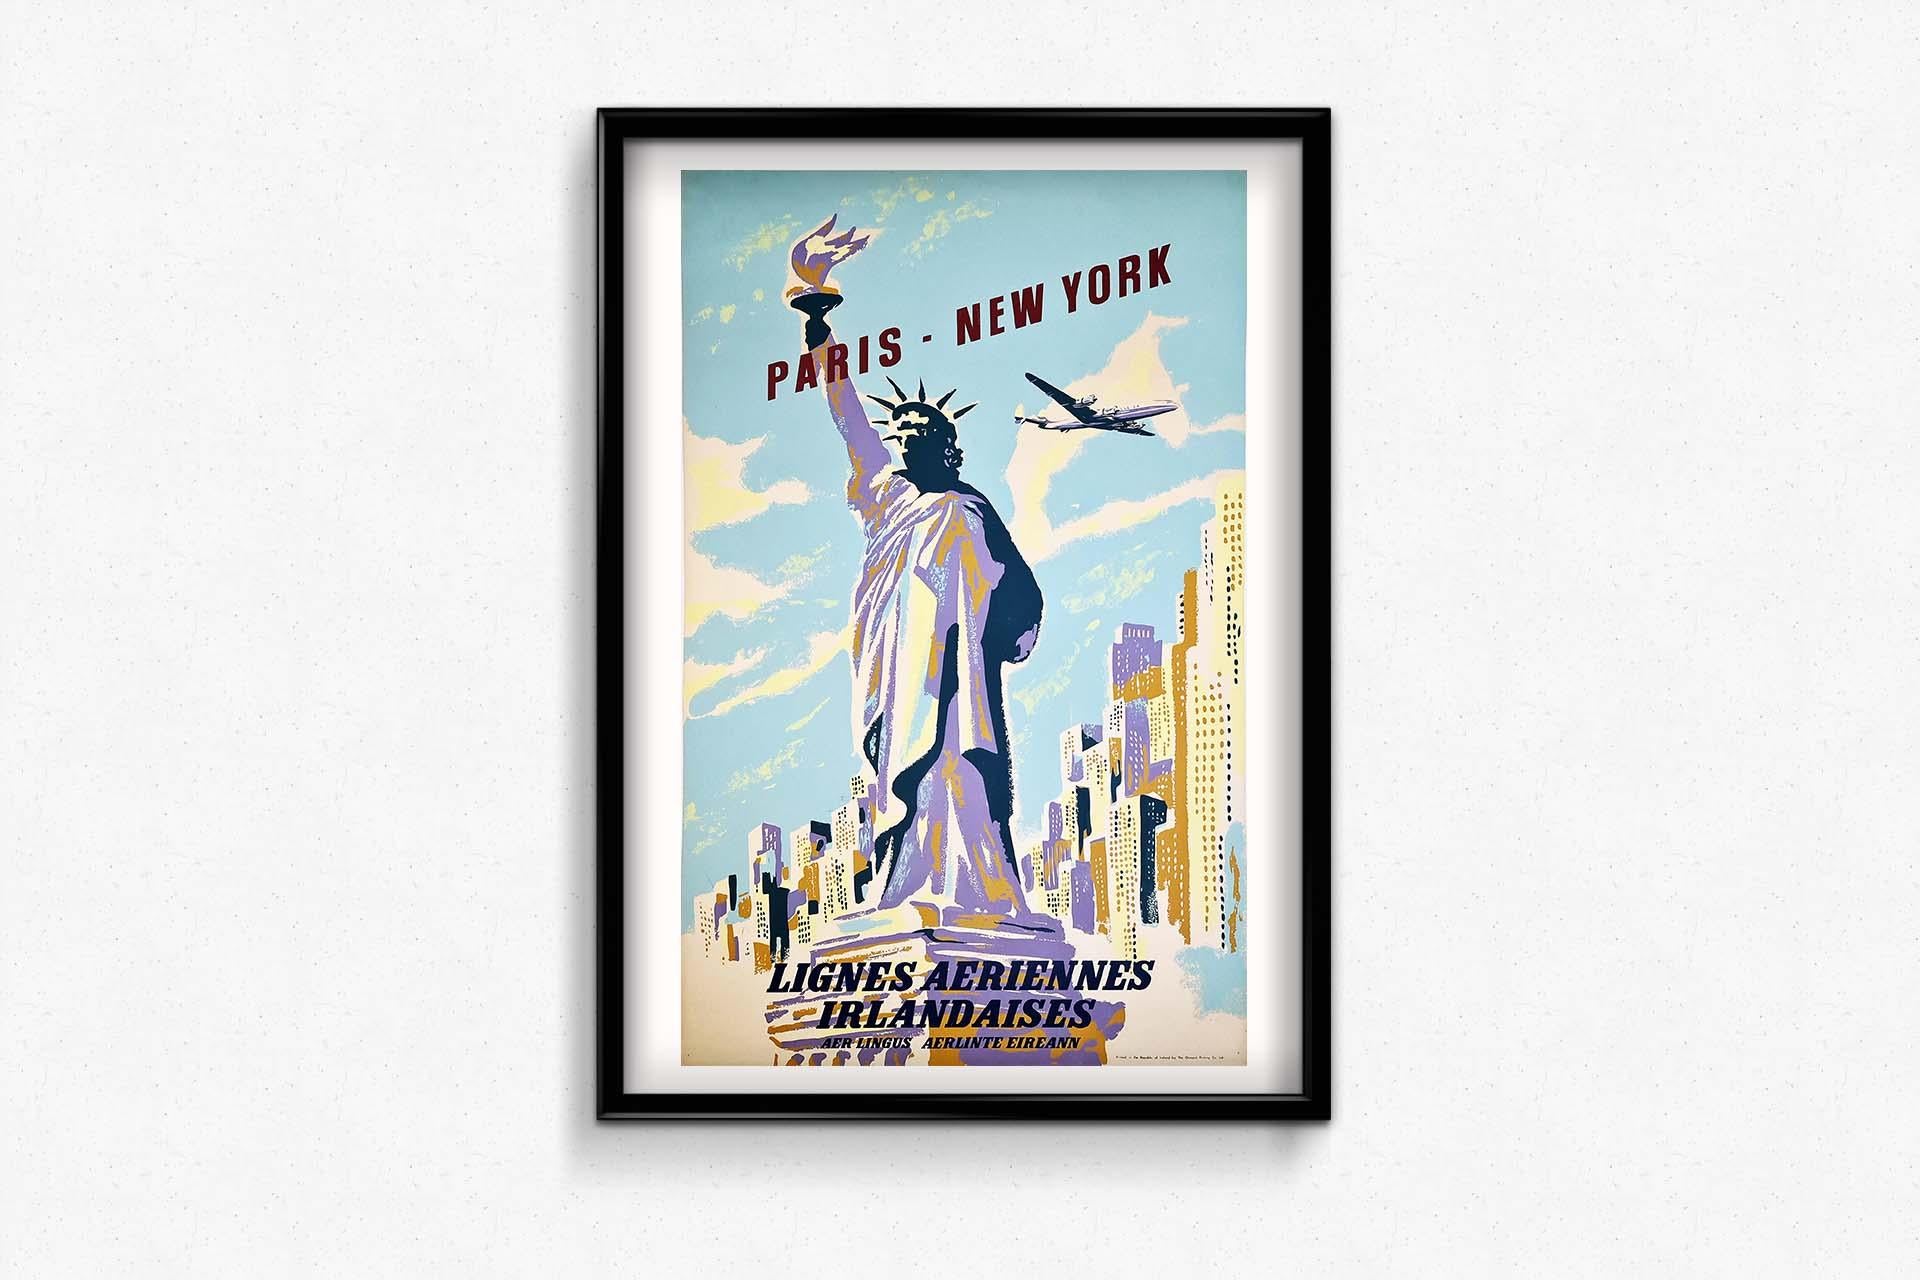 Original poster printed in silkscreen in 1952 for Aer Lingus, the Irish airline. We can see a Lockheed super-constellation flying over the Statue of Liberty and New-York.

Airline - Tourism

Aer Lingus - Statue of Liberty

The Ormond Printing Co